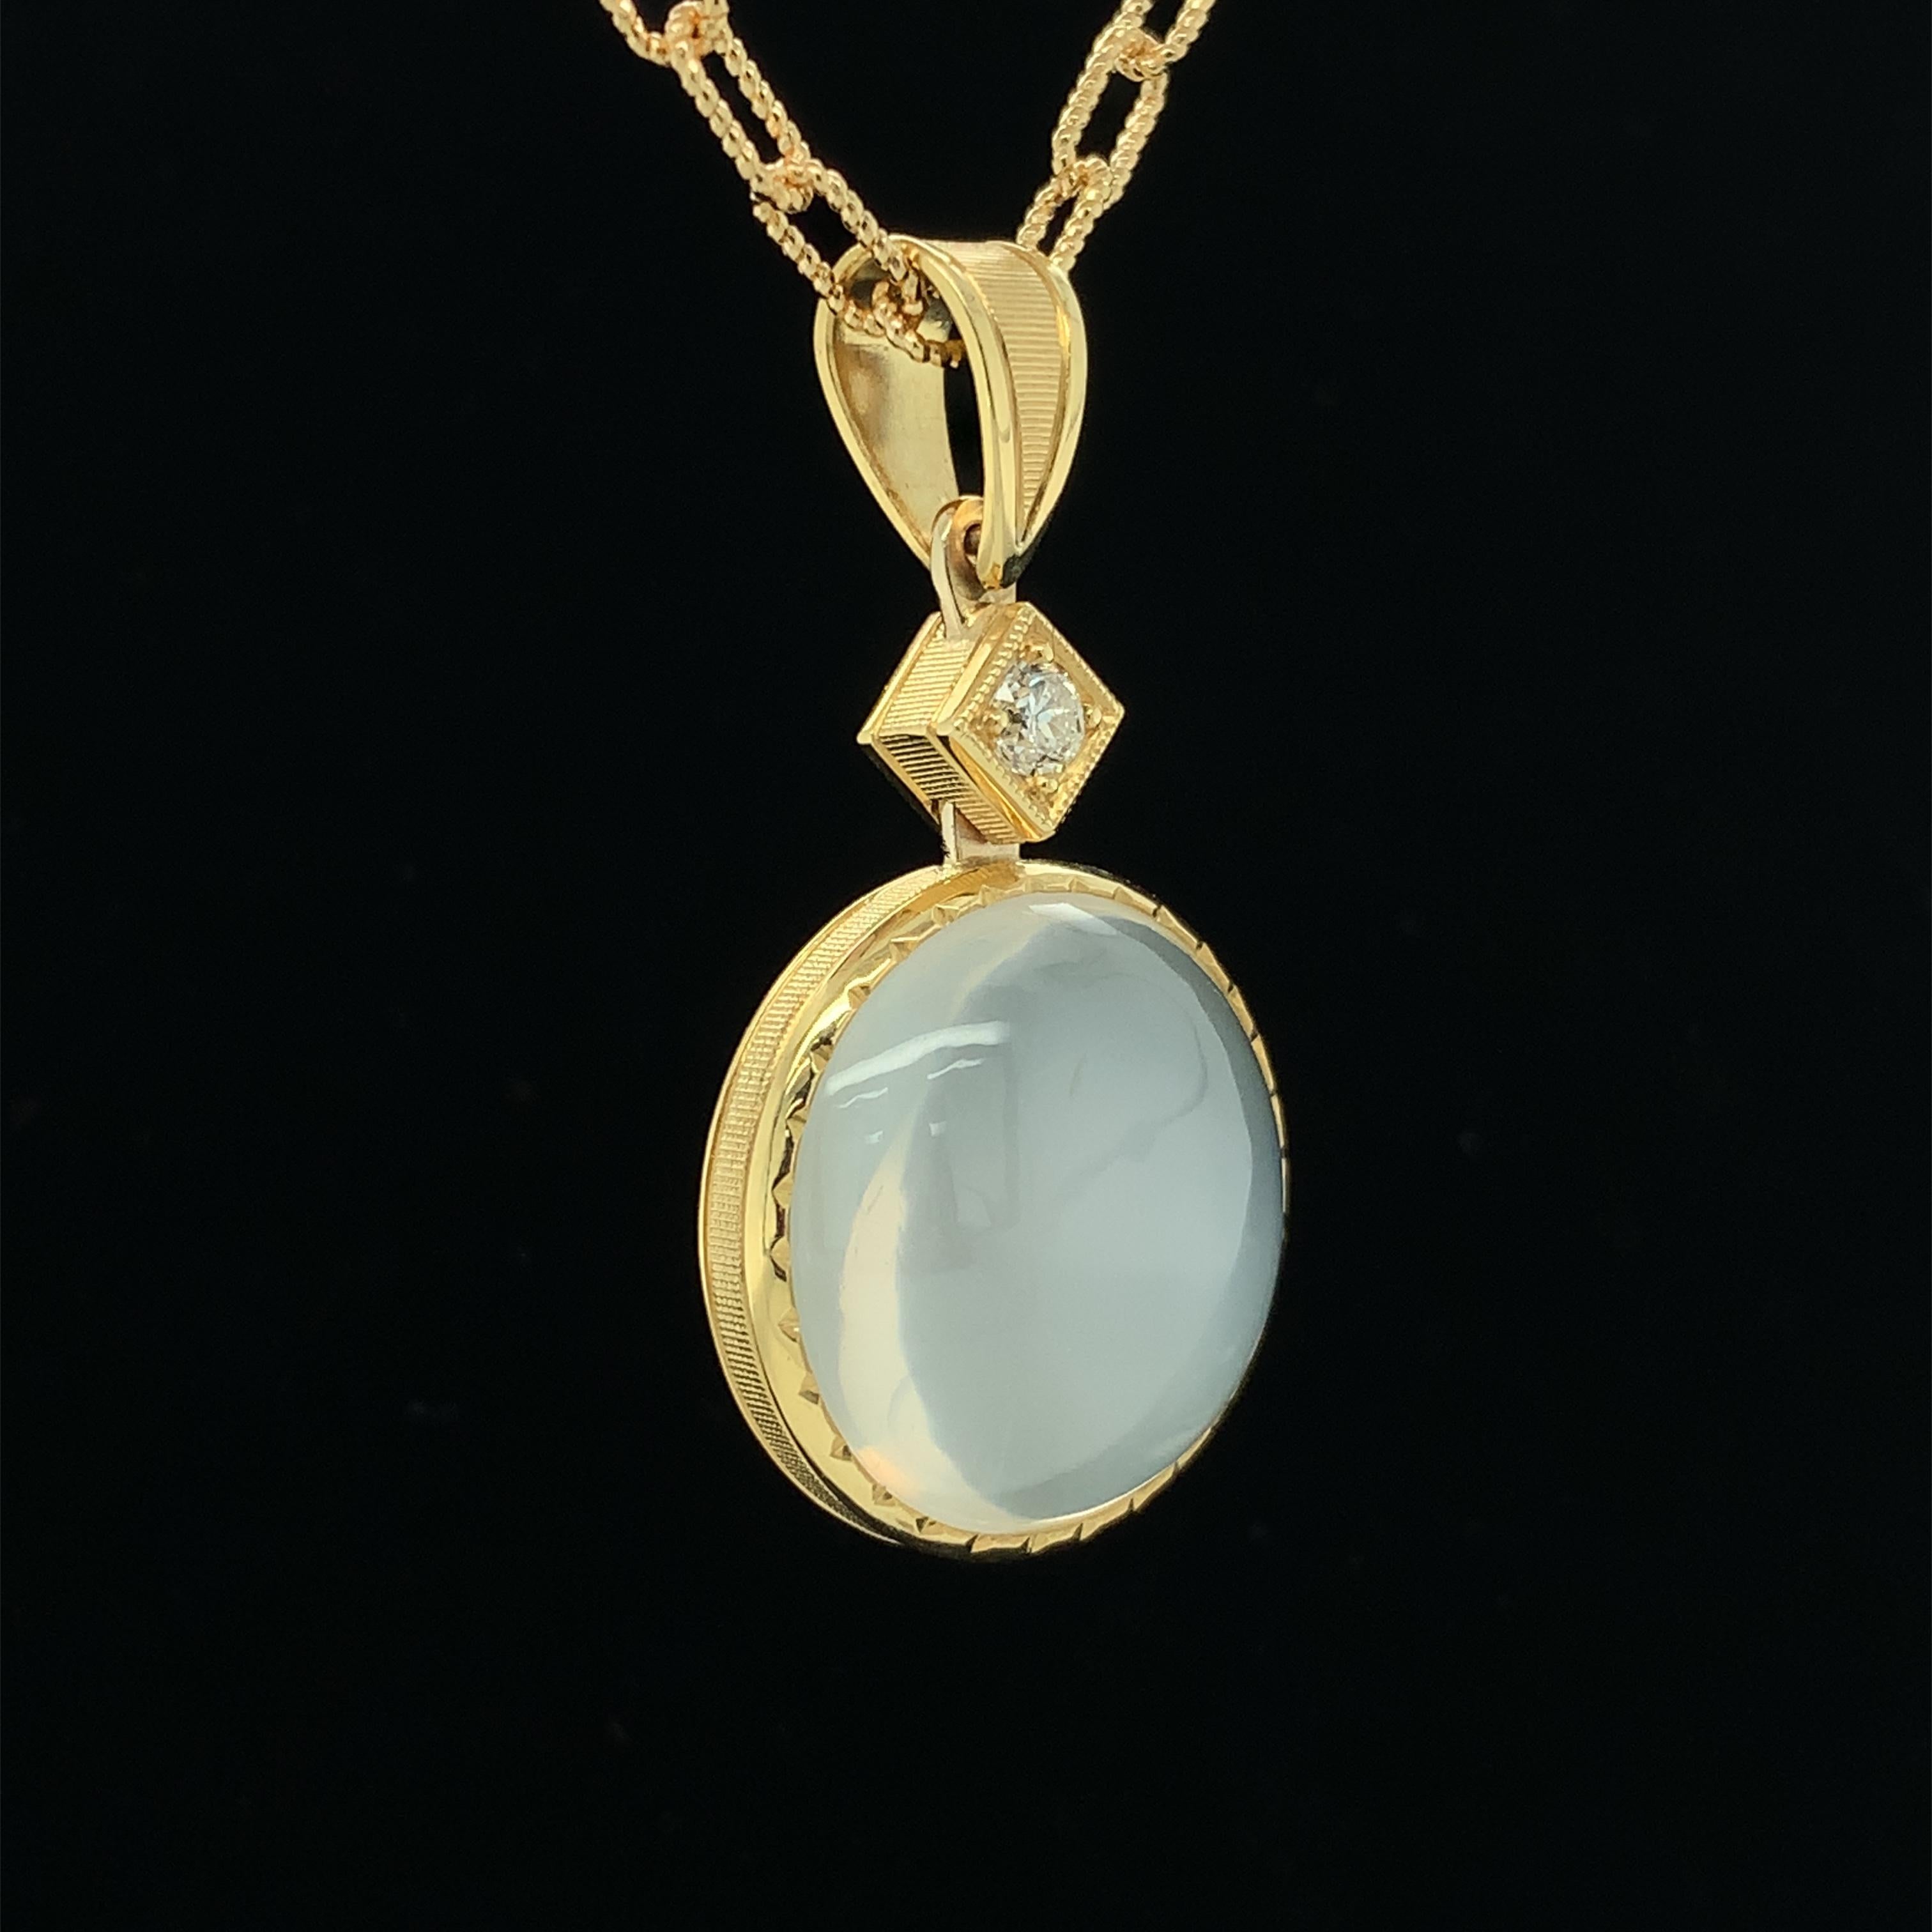 16.95 ct. Round Moonstone, Diamond, Yellow Gold Pendant Necklace with Chain 1